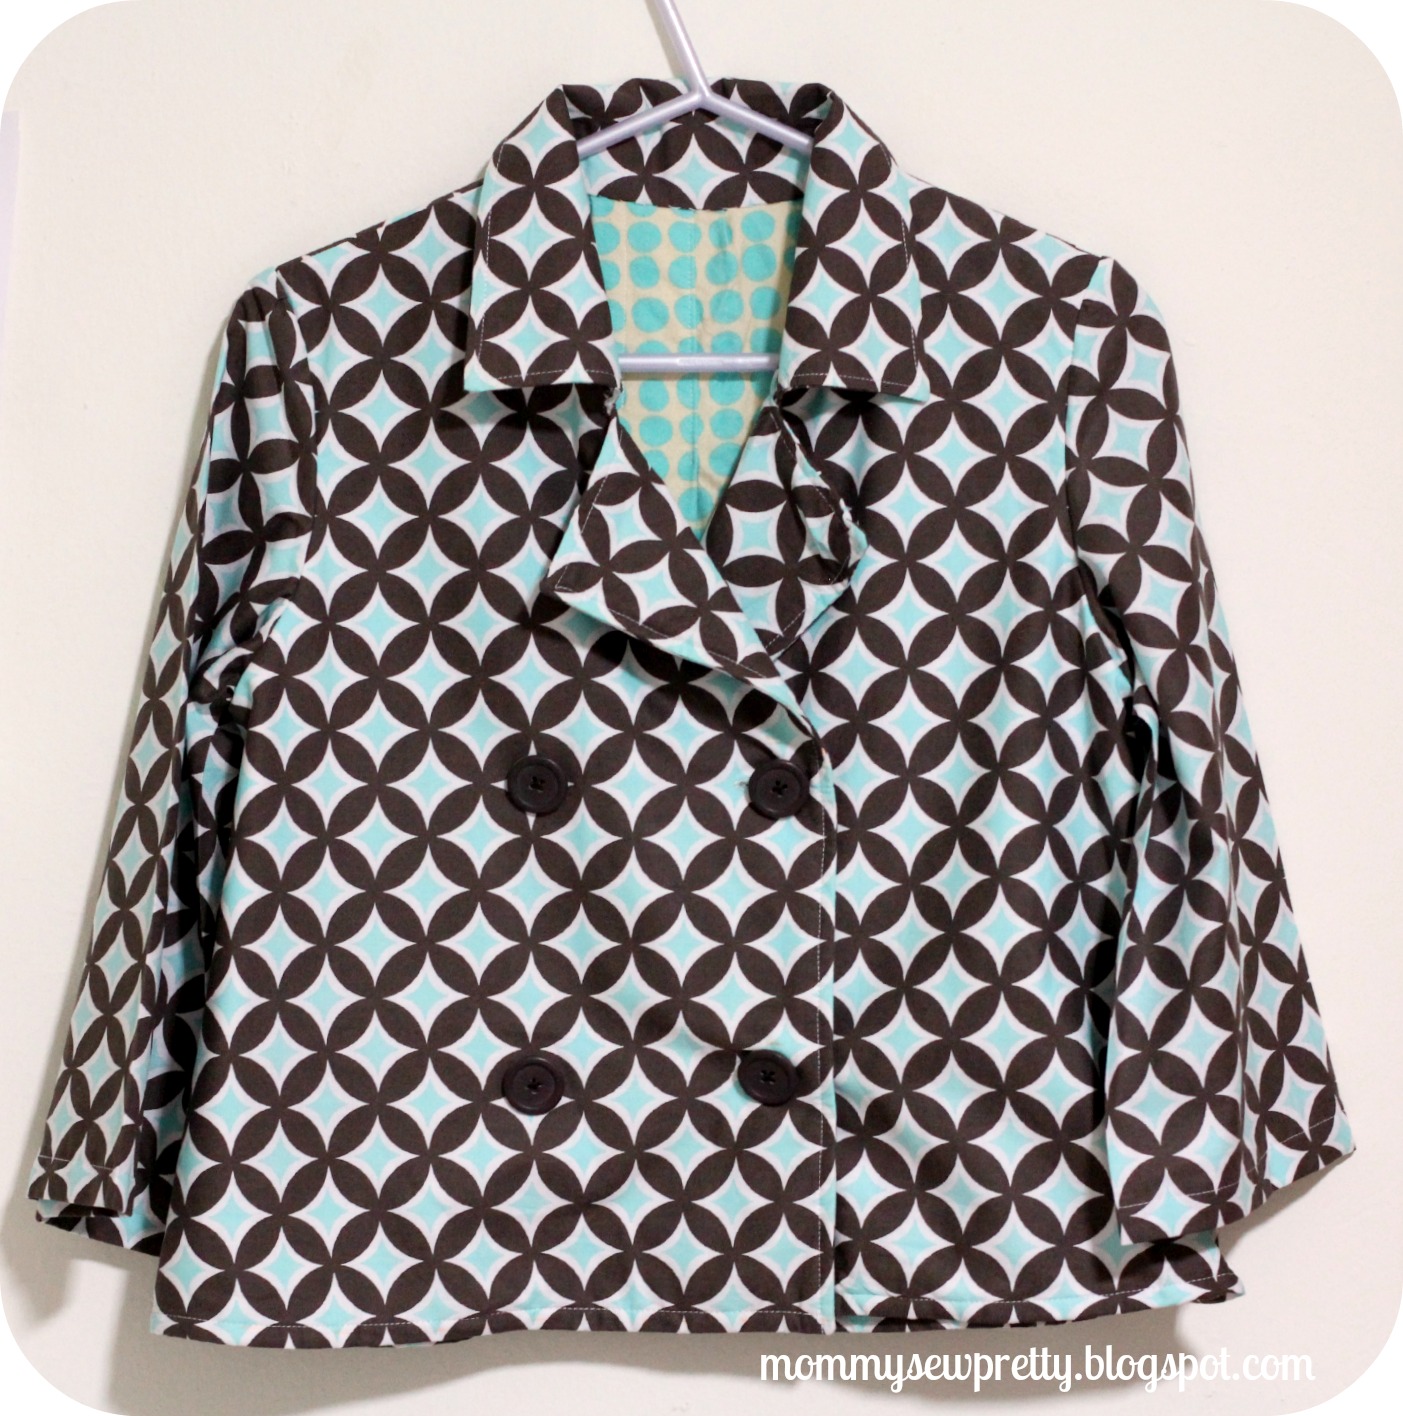 mommy sew pretty: Short Cropped Jacket